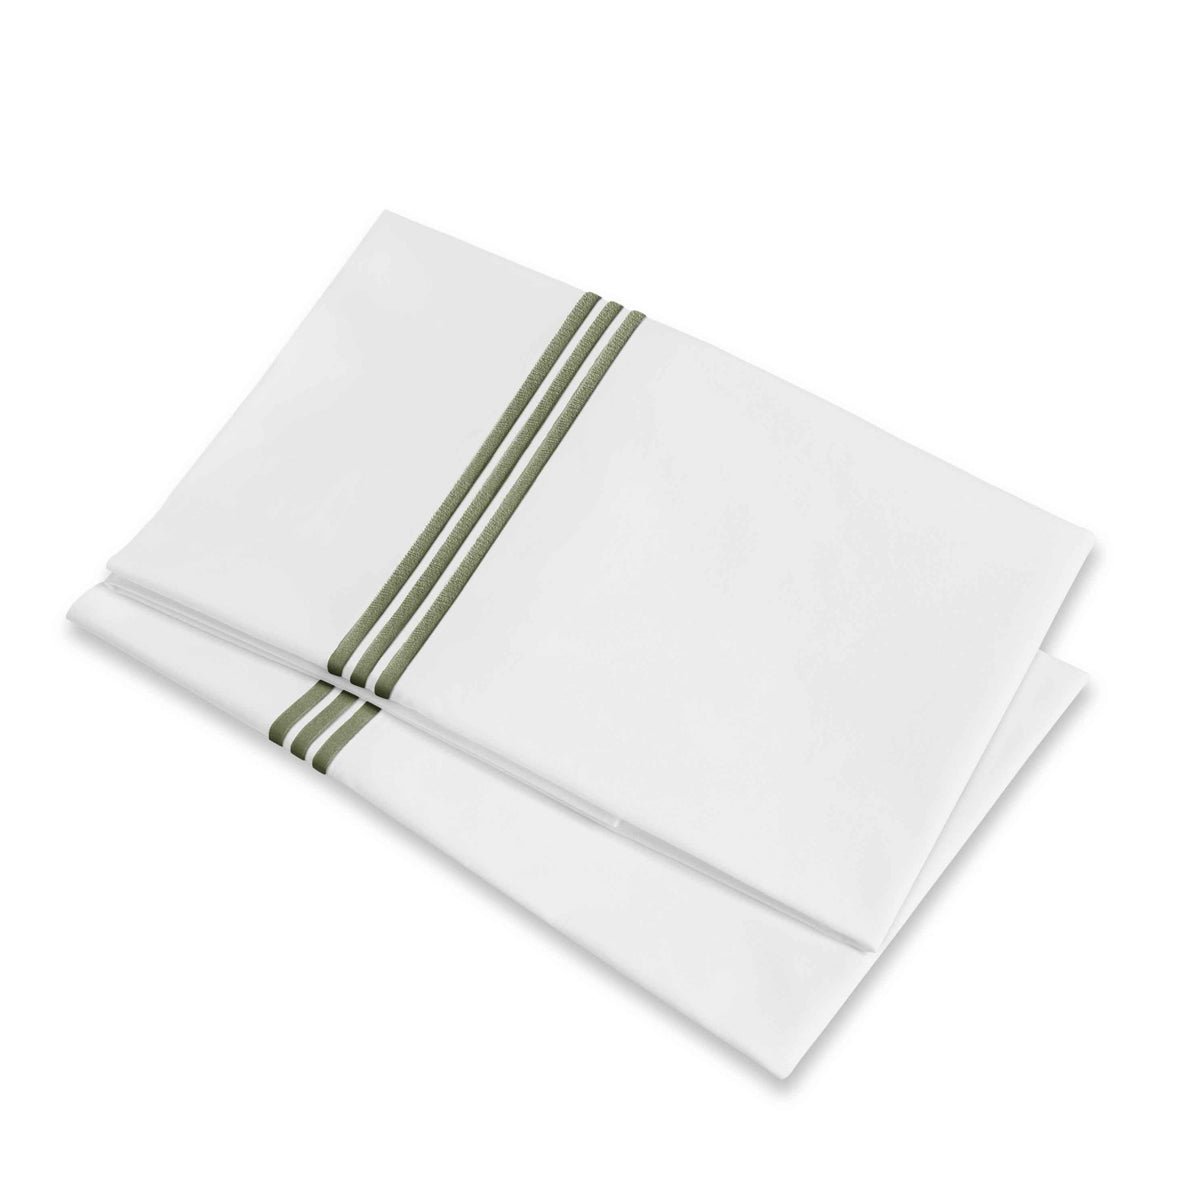 Folded Pillowcases of Signoria Platinum Percale Bedding in White/Olive Green Color